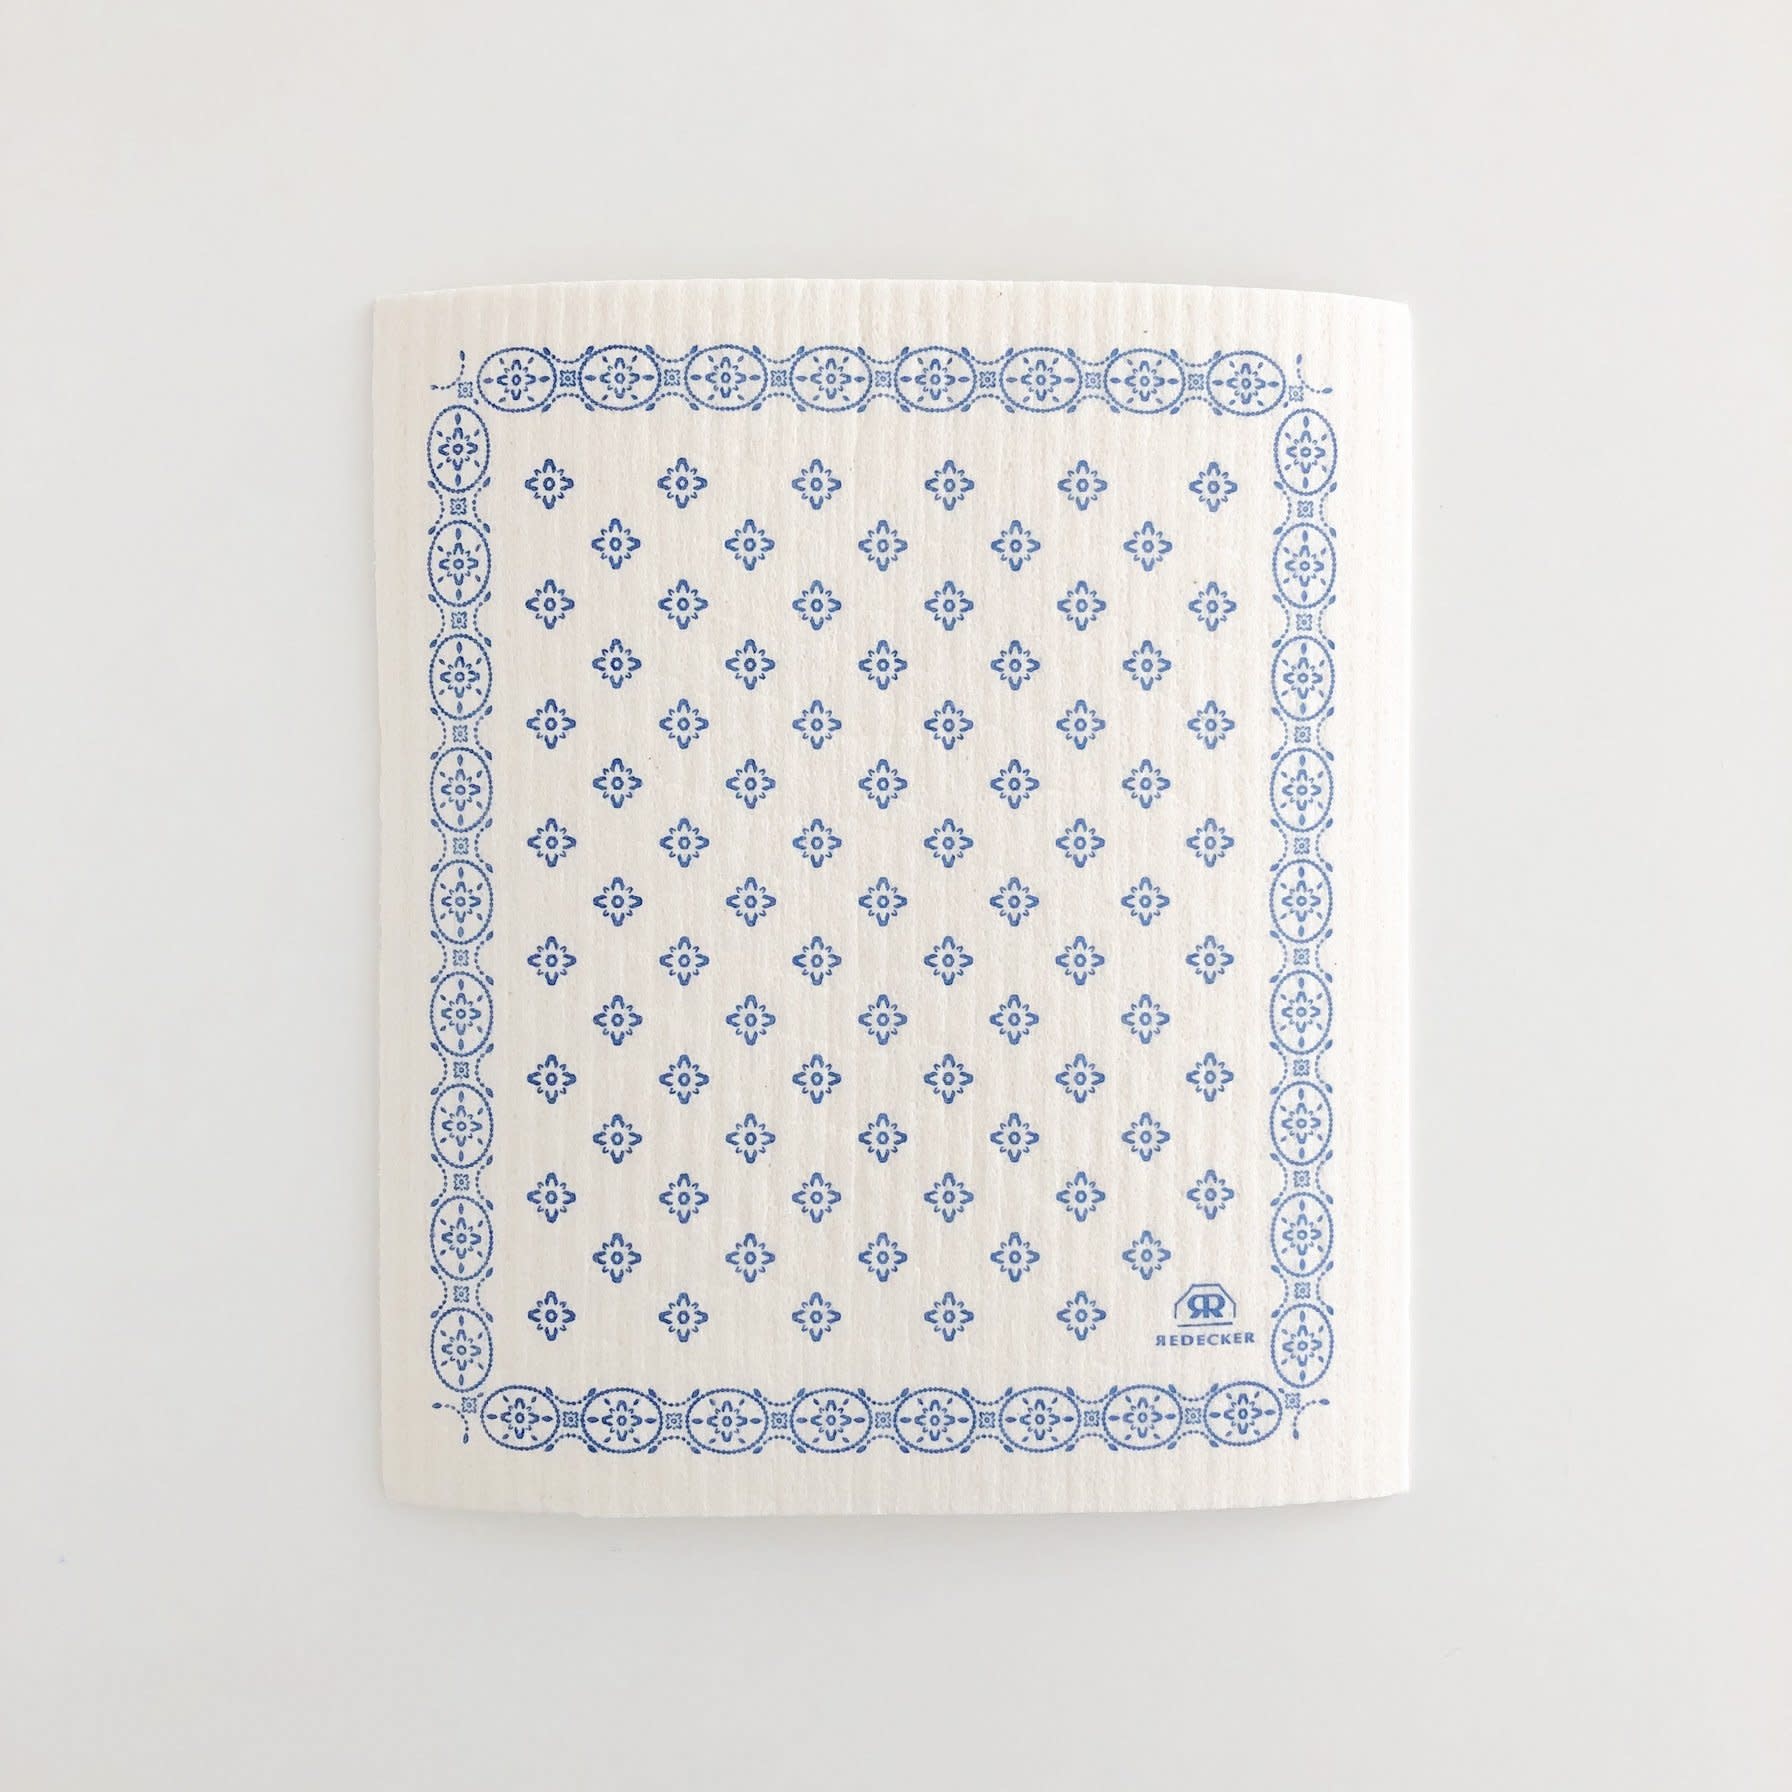 We tried a Redecker's Swedish Dishcloth for a month, here's what